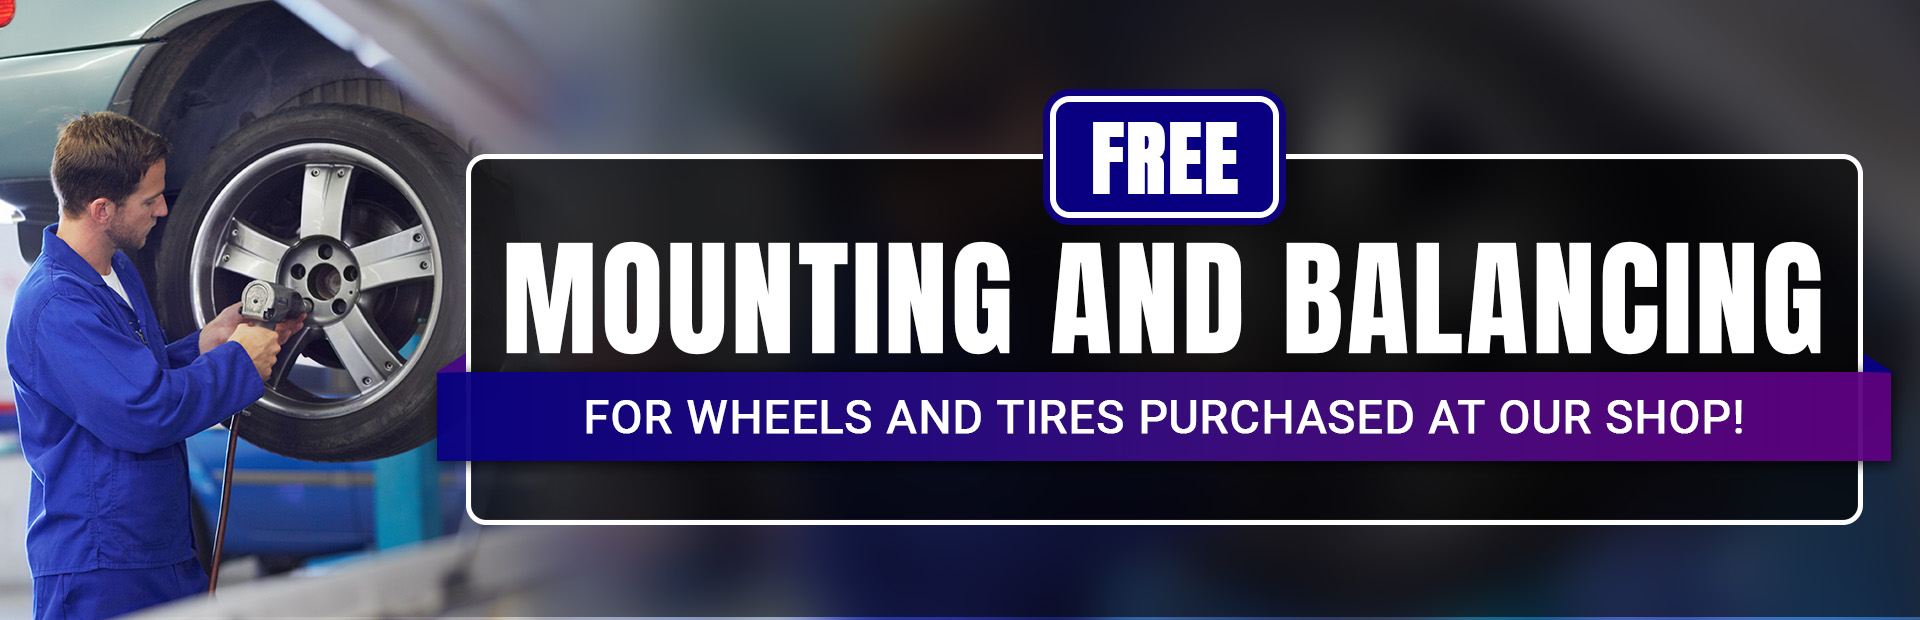 Free Mounting and Balancing for Wheels and Tires Purchased at Our Shop!